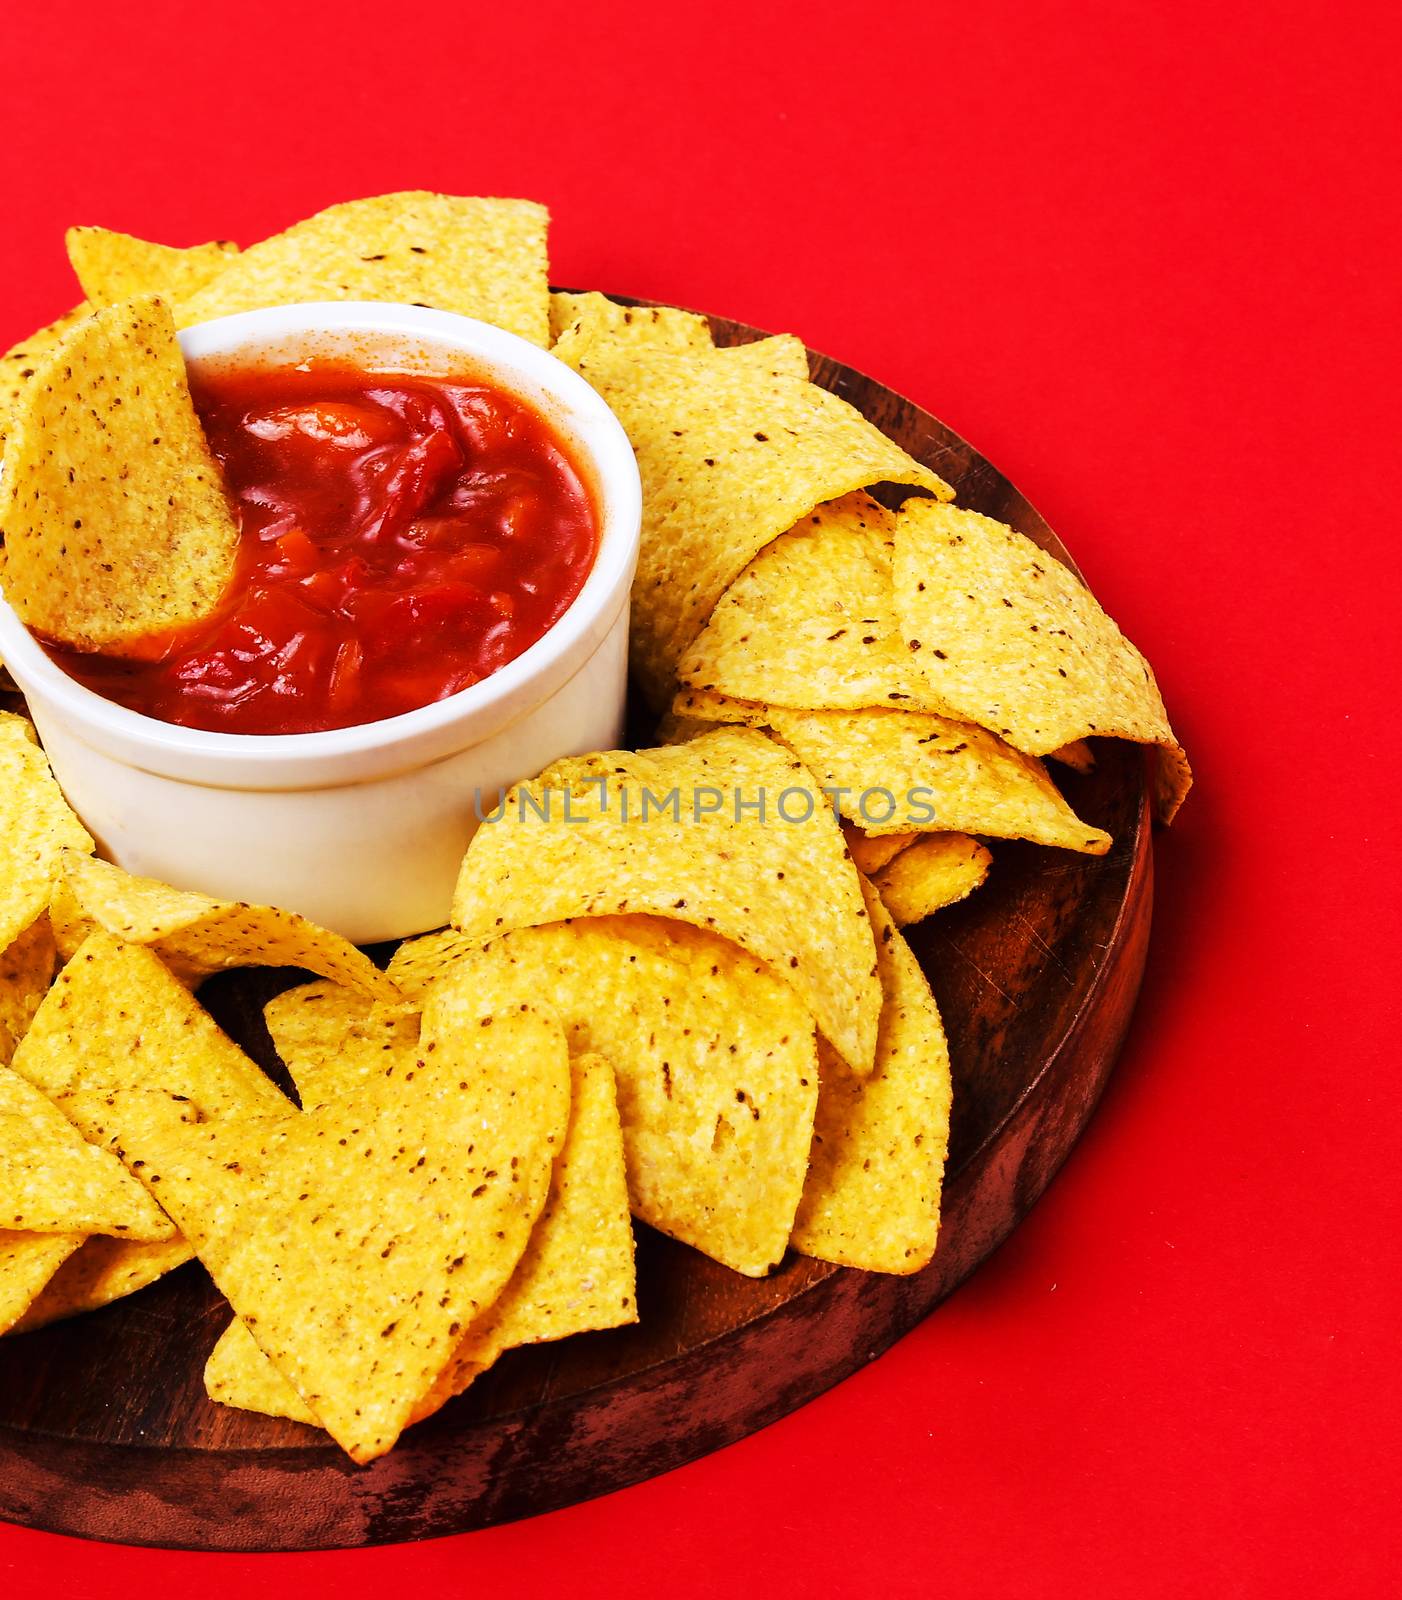 Potato chips with sauce on a red background